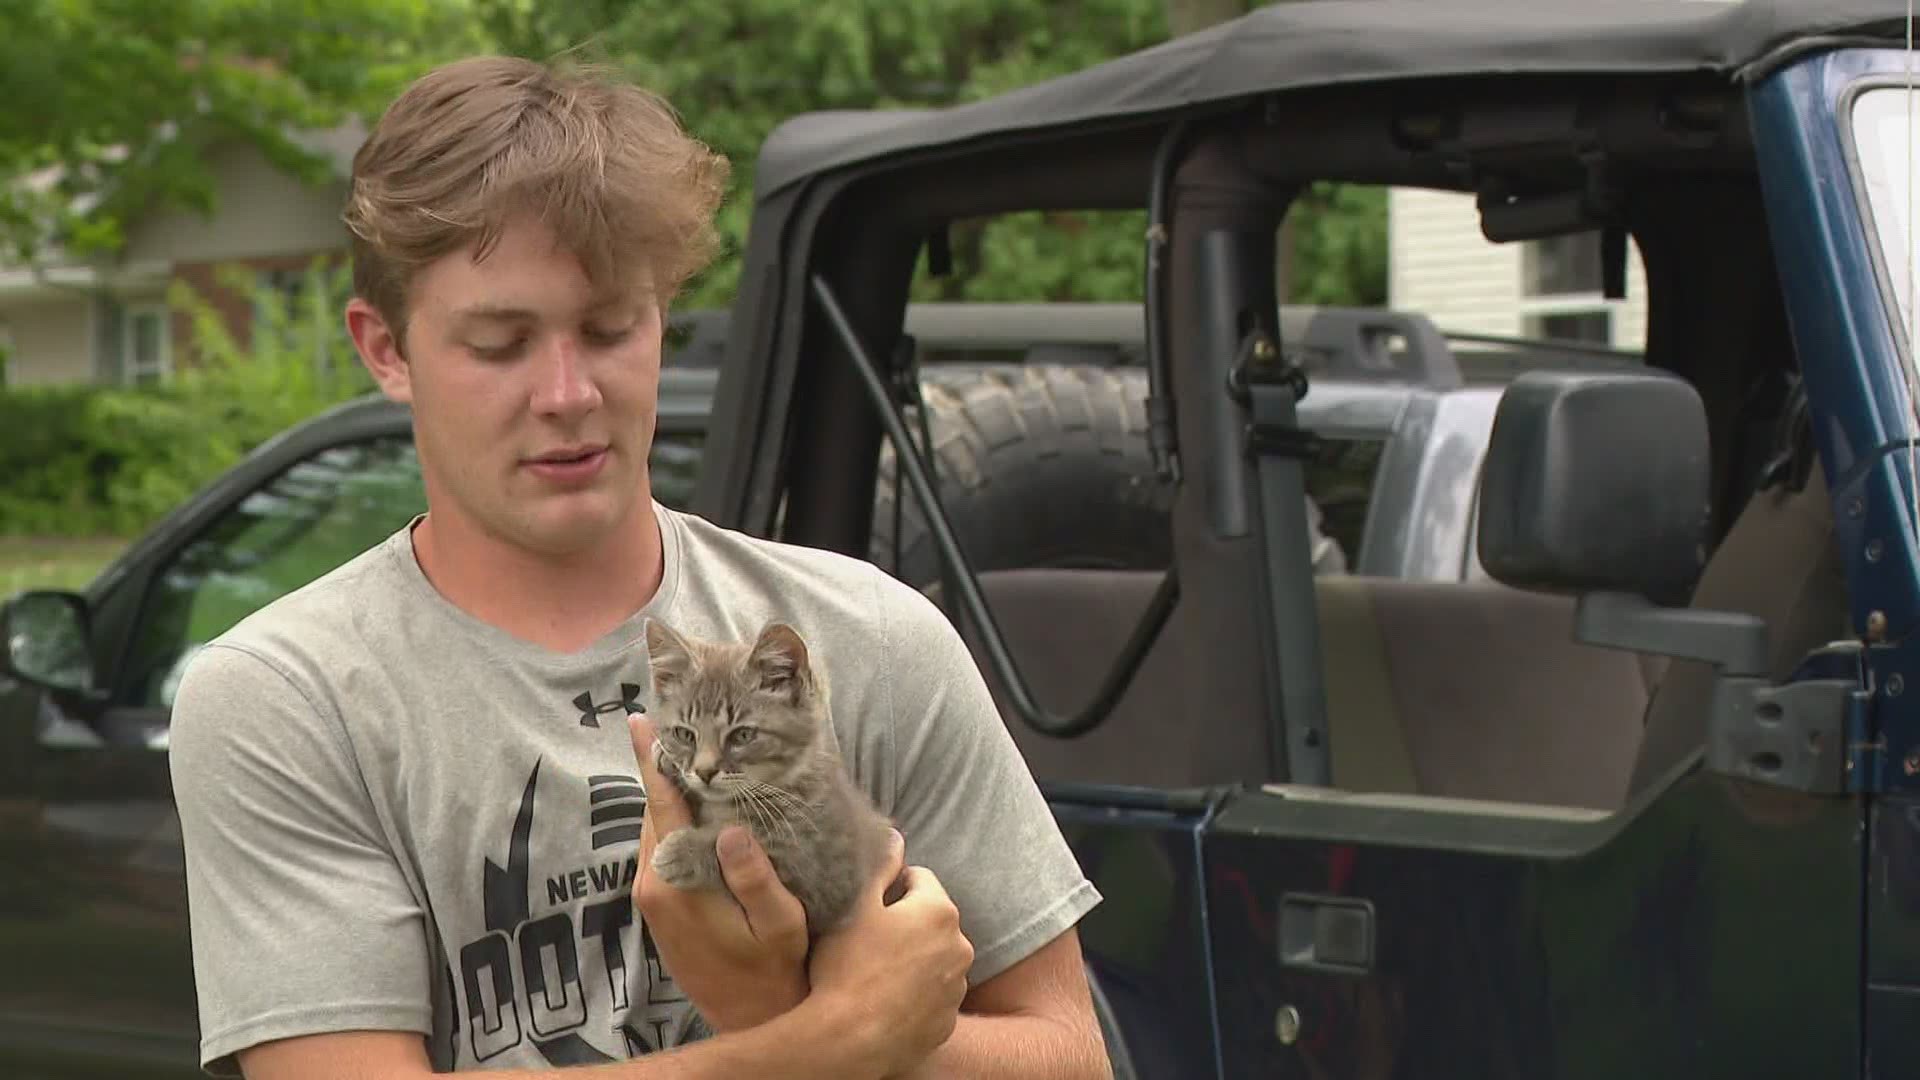 The small kitten appeared in the bank's drive-thru lane after a black Ford Escalade pulled away. Two boys waiting in line grabbed the cat and named him, "Banks."